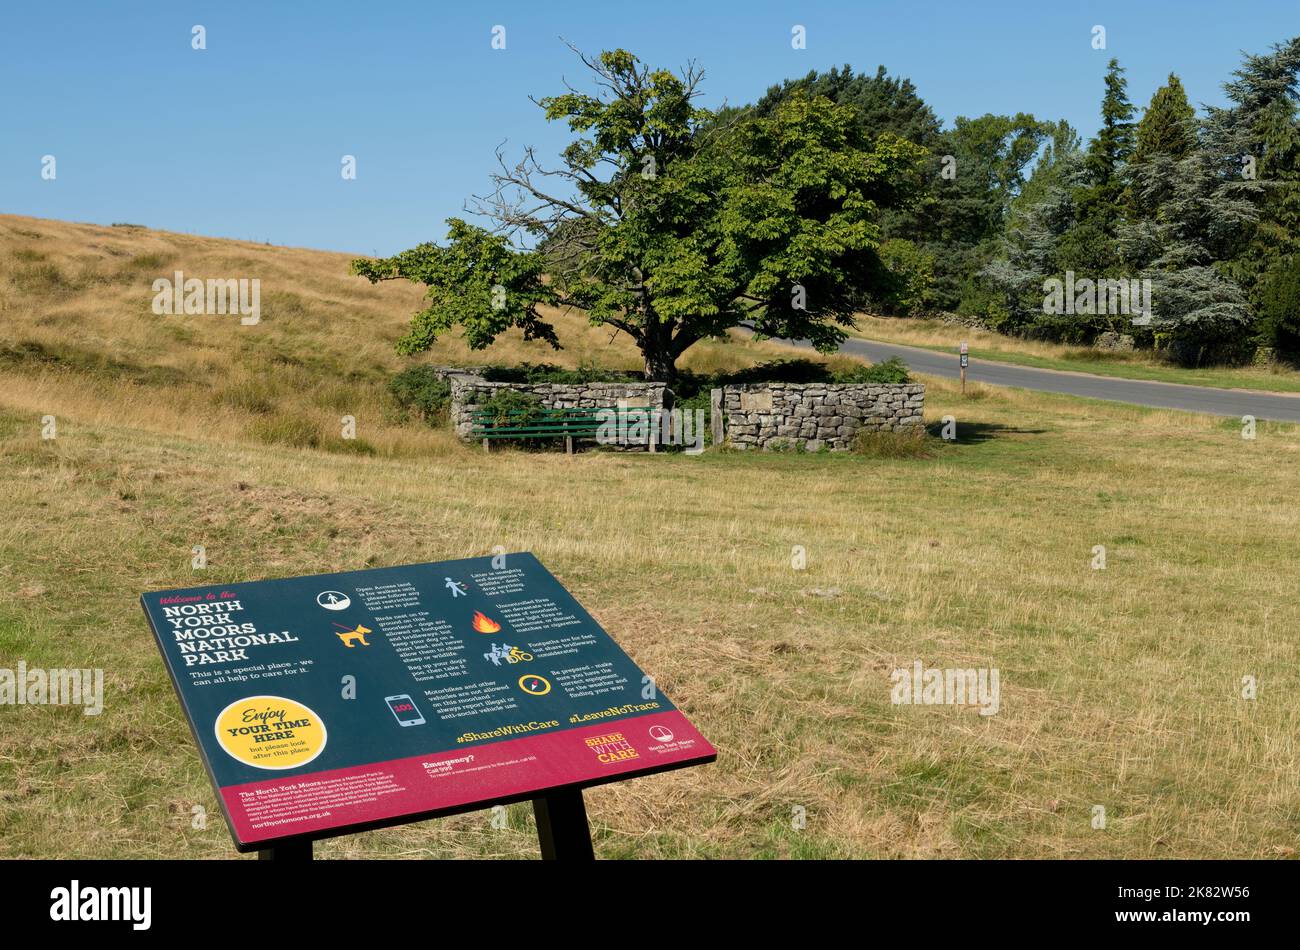 North York Moors National Park information sign wooden seat near a penfold enclosure for stray animals Goathland near Whitby North Yorkshire England Stock Photo